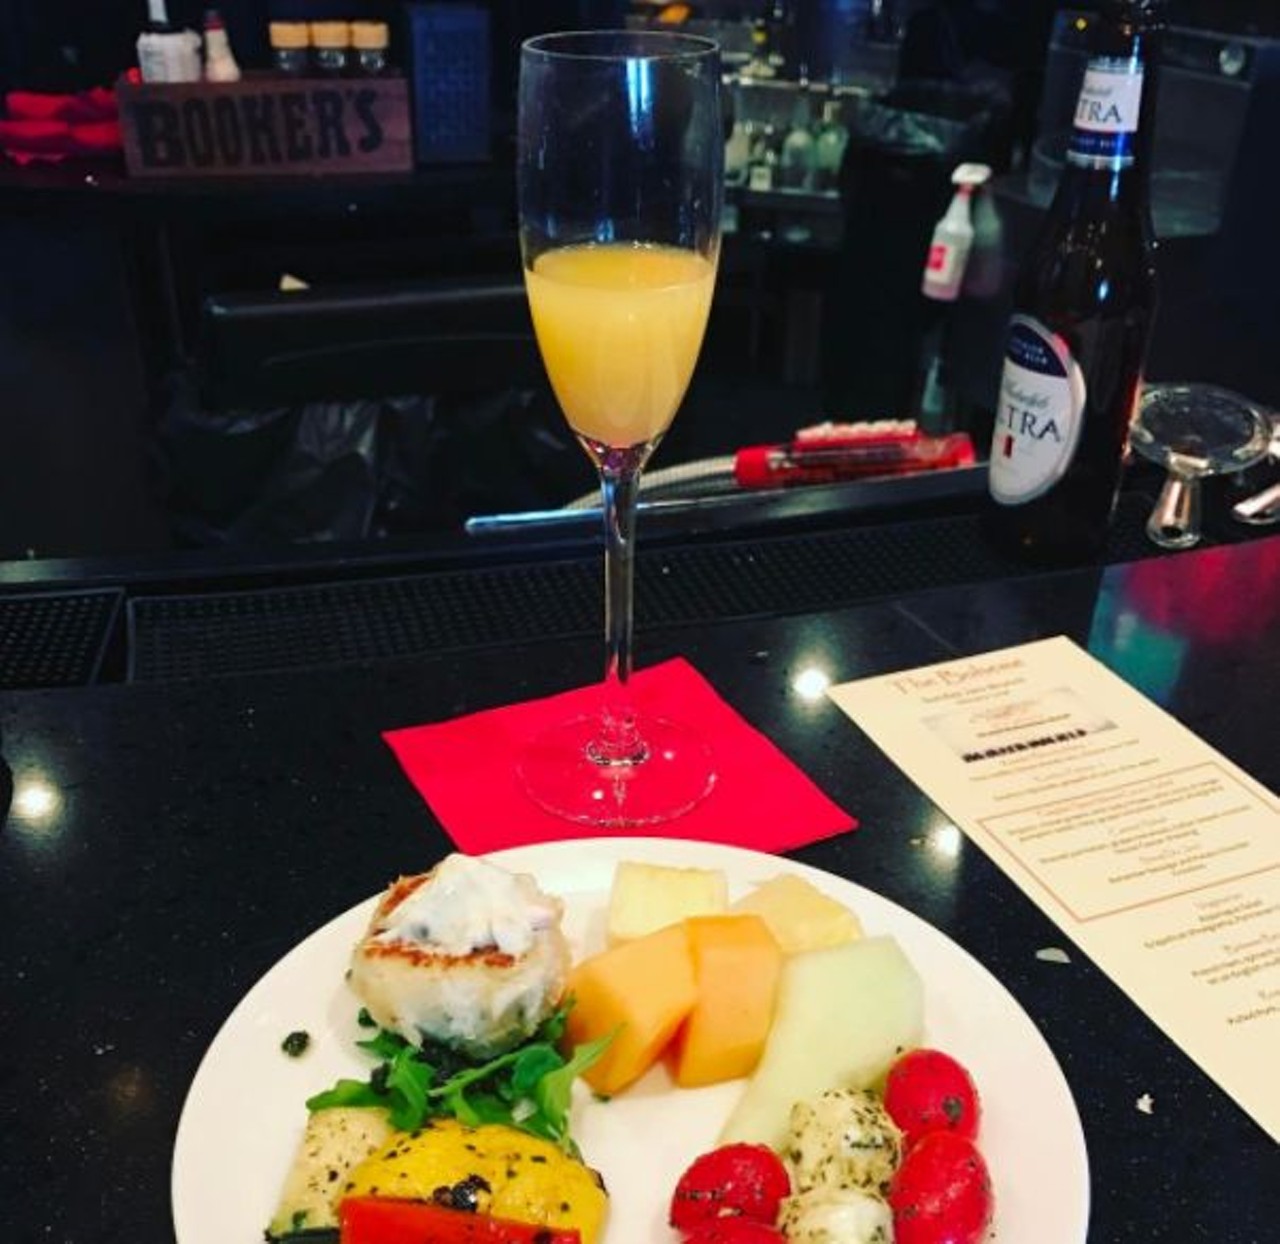 The Boheme Restaurant
A $49 dollar brunch package at the Grand Bohemian Hotel is a good way to enjoy endless mimosas. Occurs on Sundays from 10:30 a.m. to 2 p.m.
325 S. Orange Ave., 407-581-4700
Photo via kathy_lynne_/Instagram